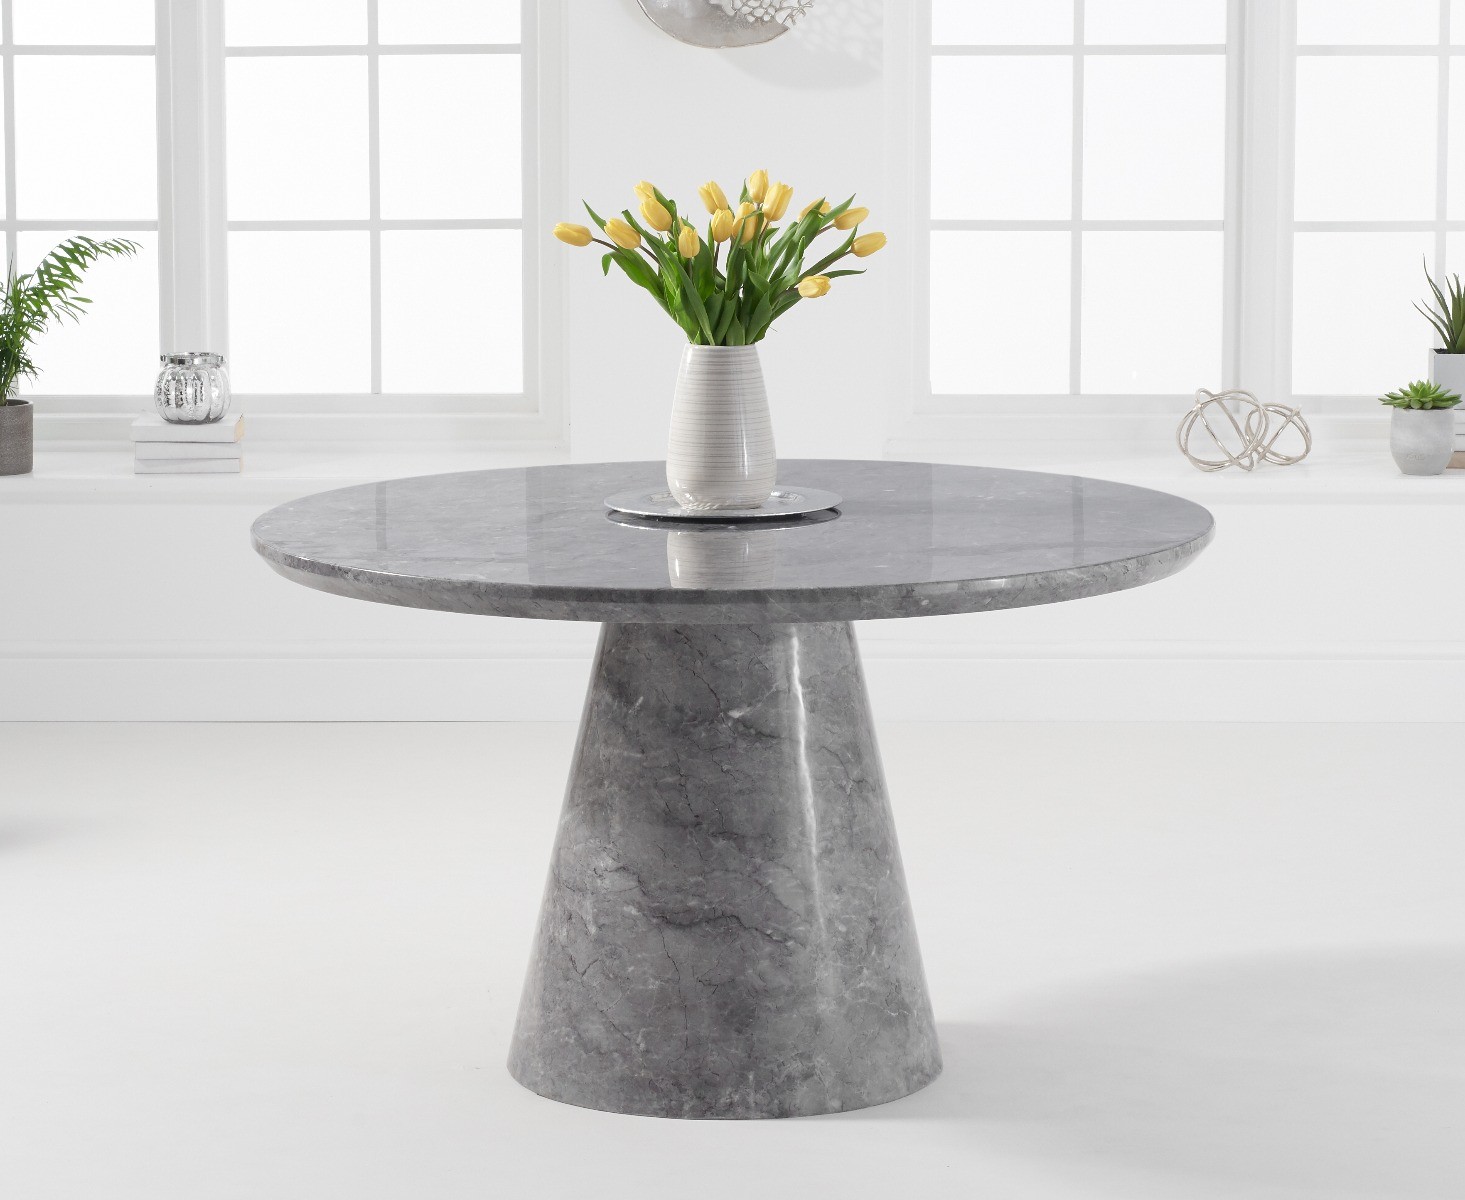 Photo 2 of Ravello 130cm round grey marble dining table with 6 cream francesca chairs